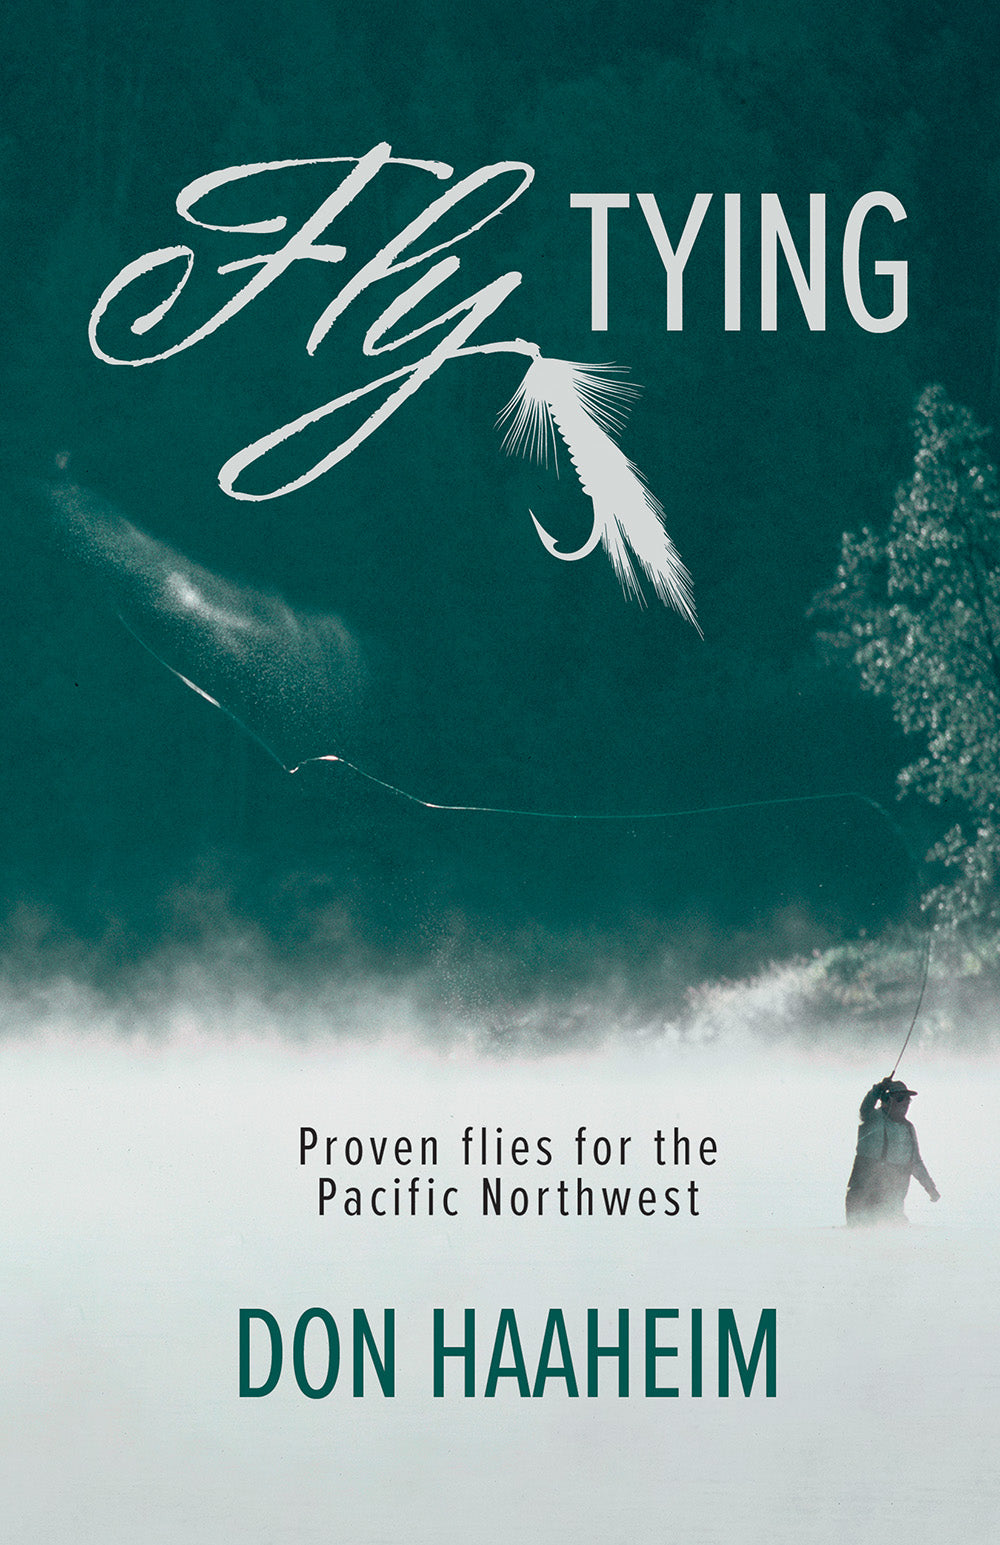 Fly Tying: Proven Flies for the Pacific Northwest- Hancock House – Hancock  House Publishers